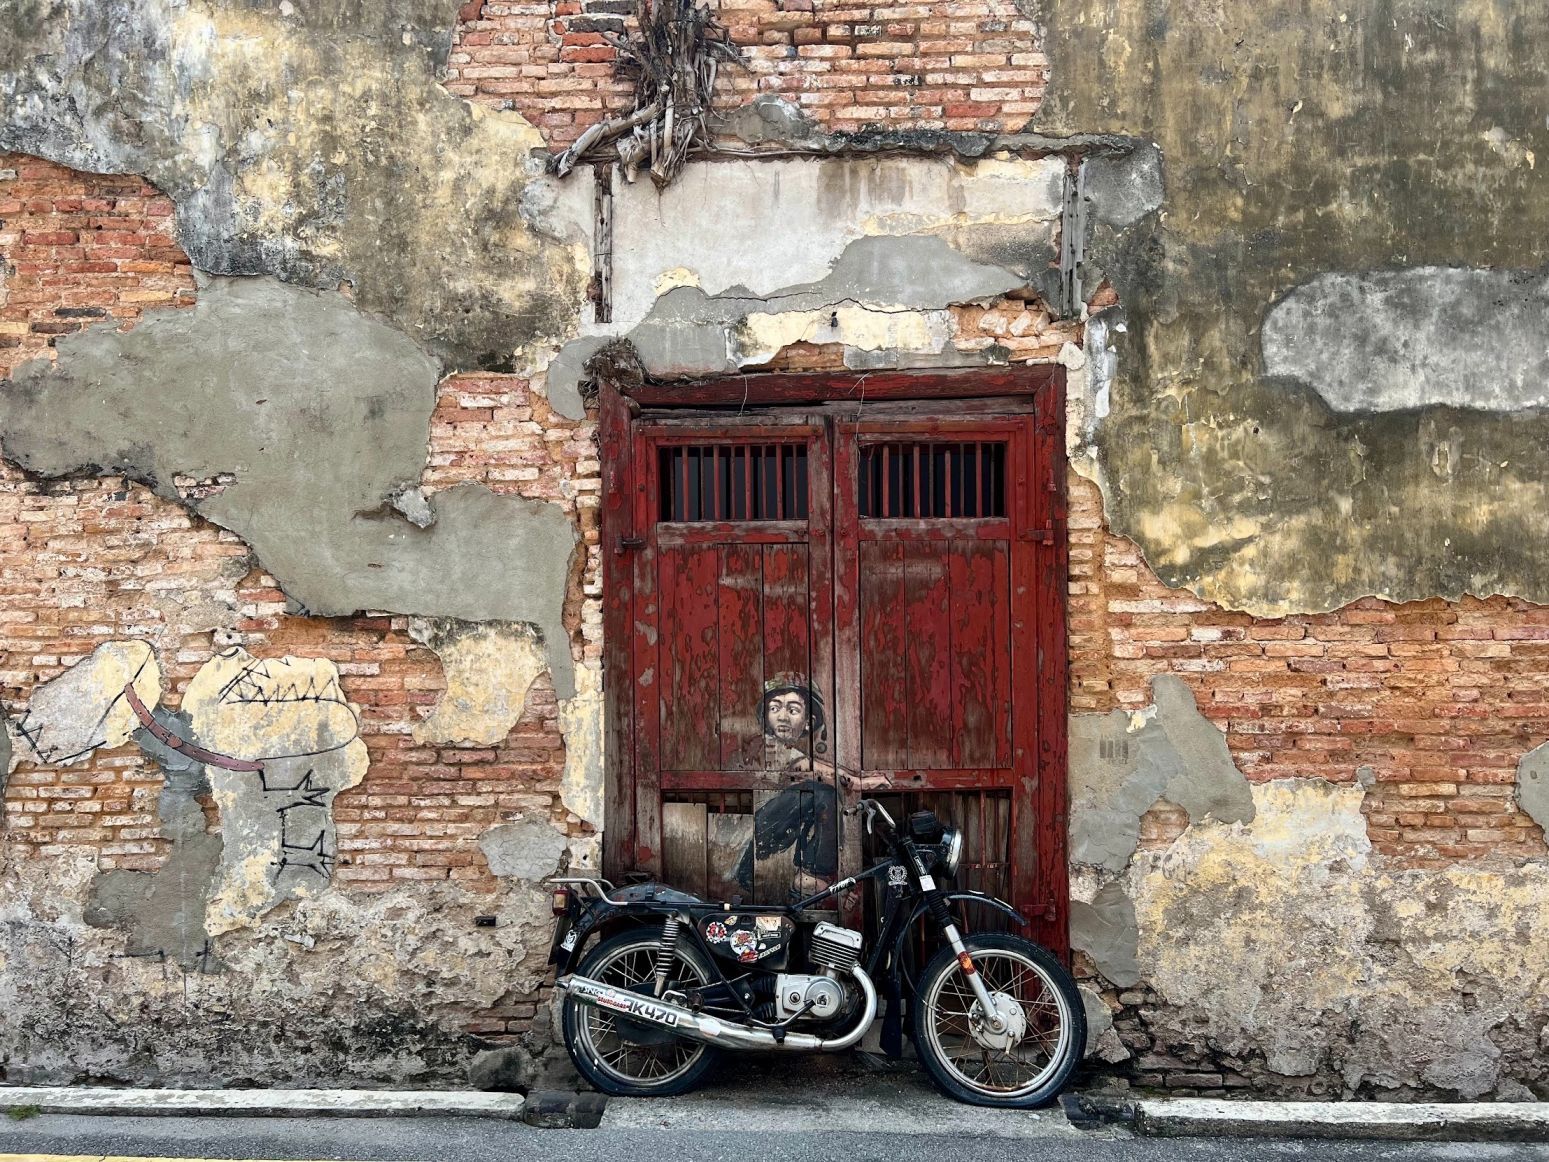 Boy on a motorbike, mural, wall painting in Georgetown, Penang, Malaysia